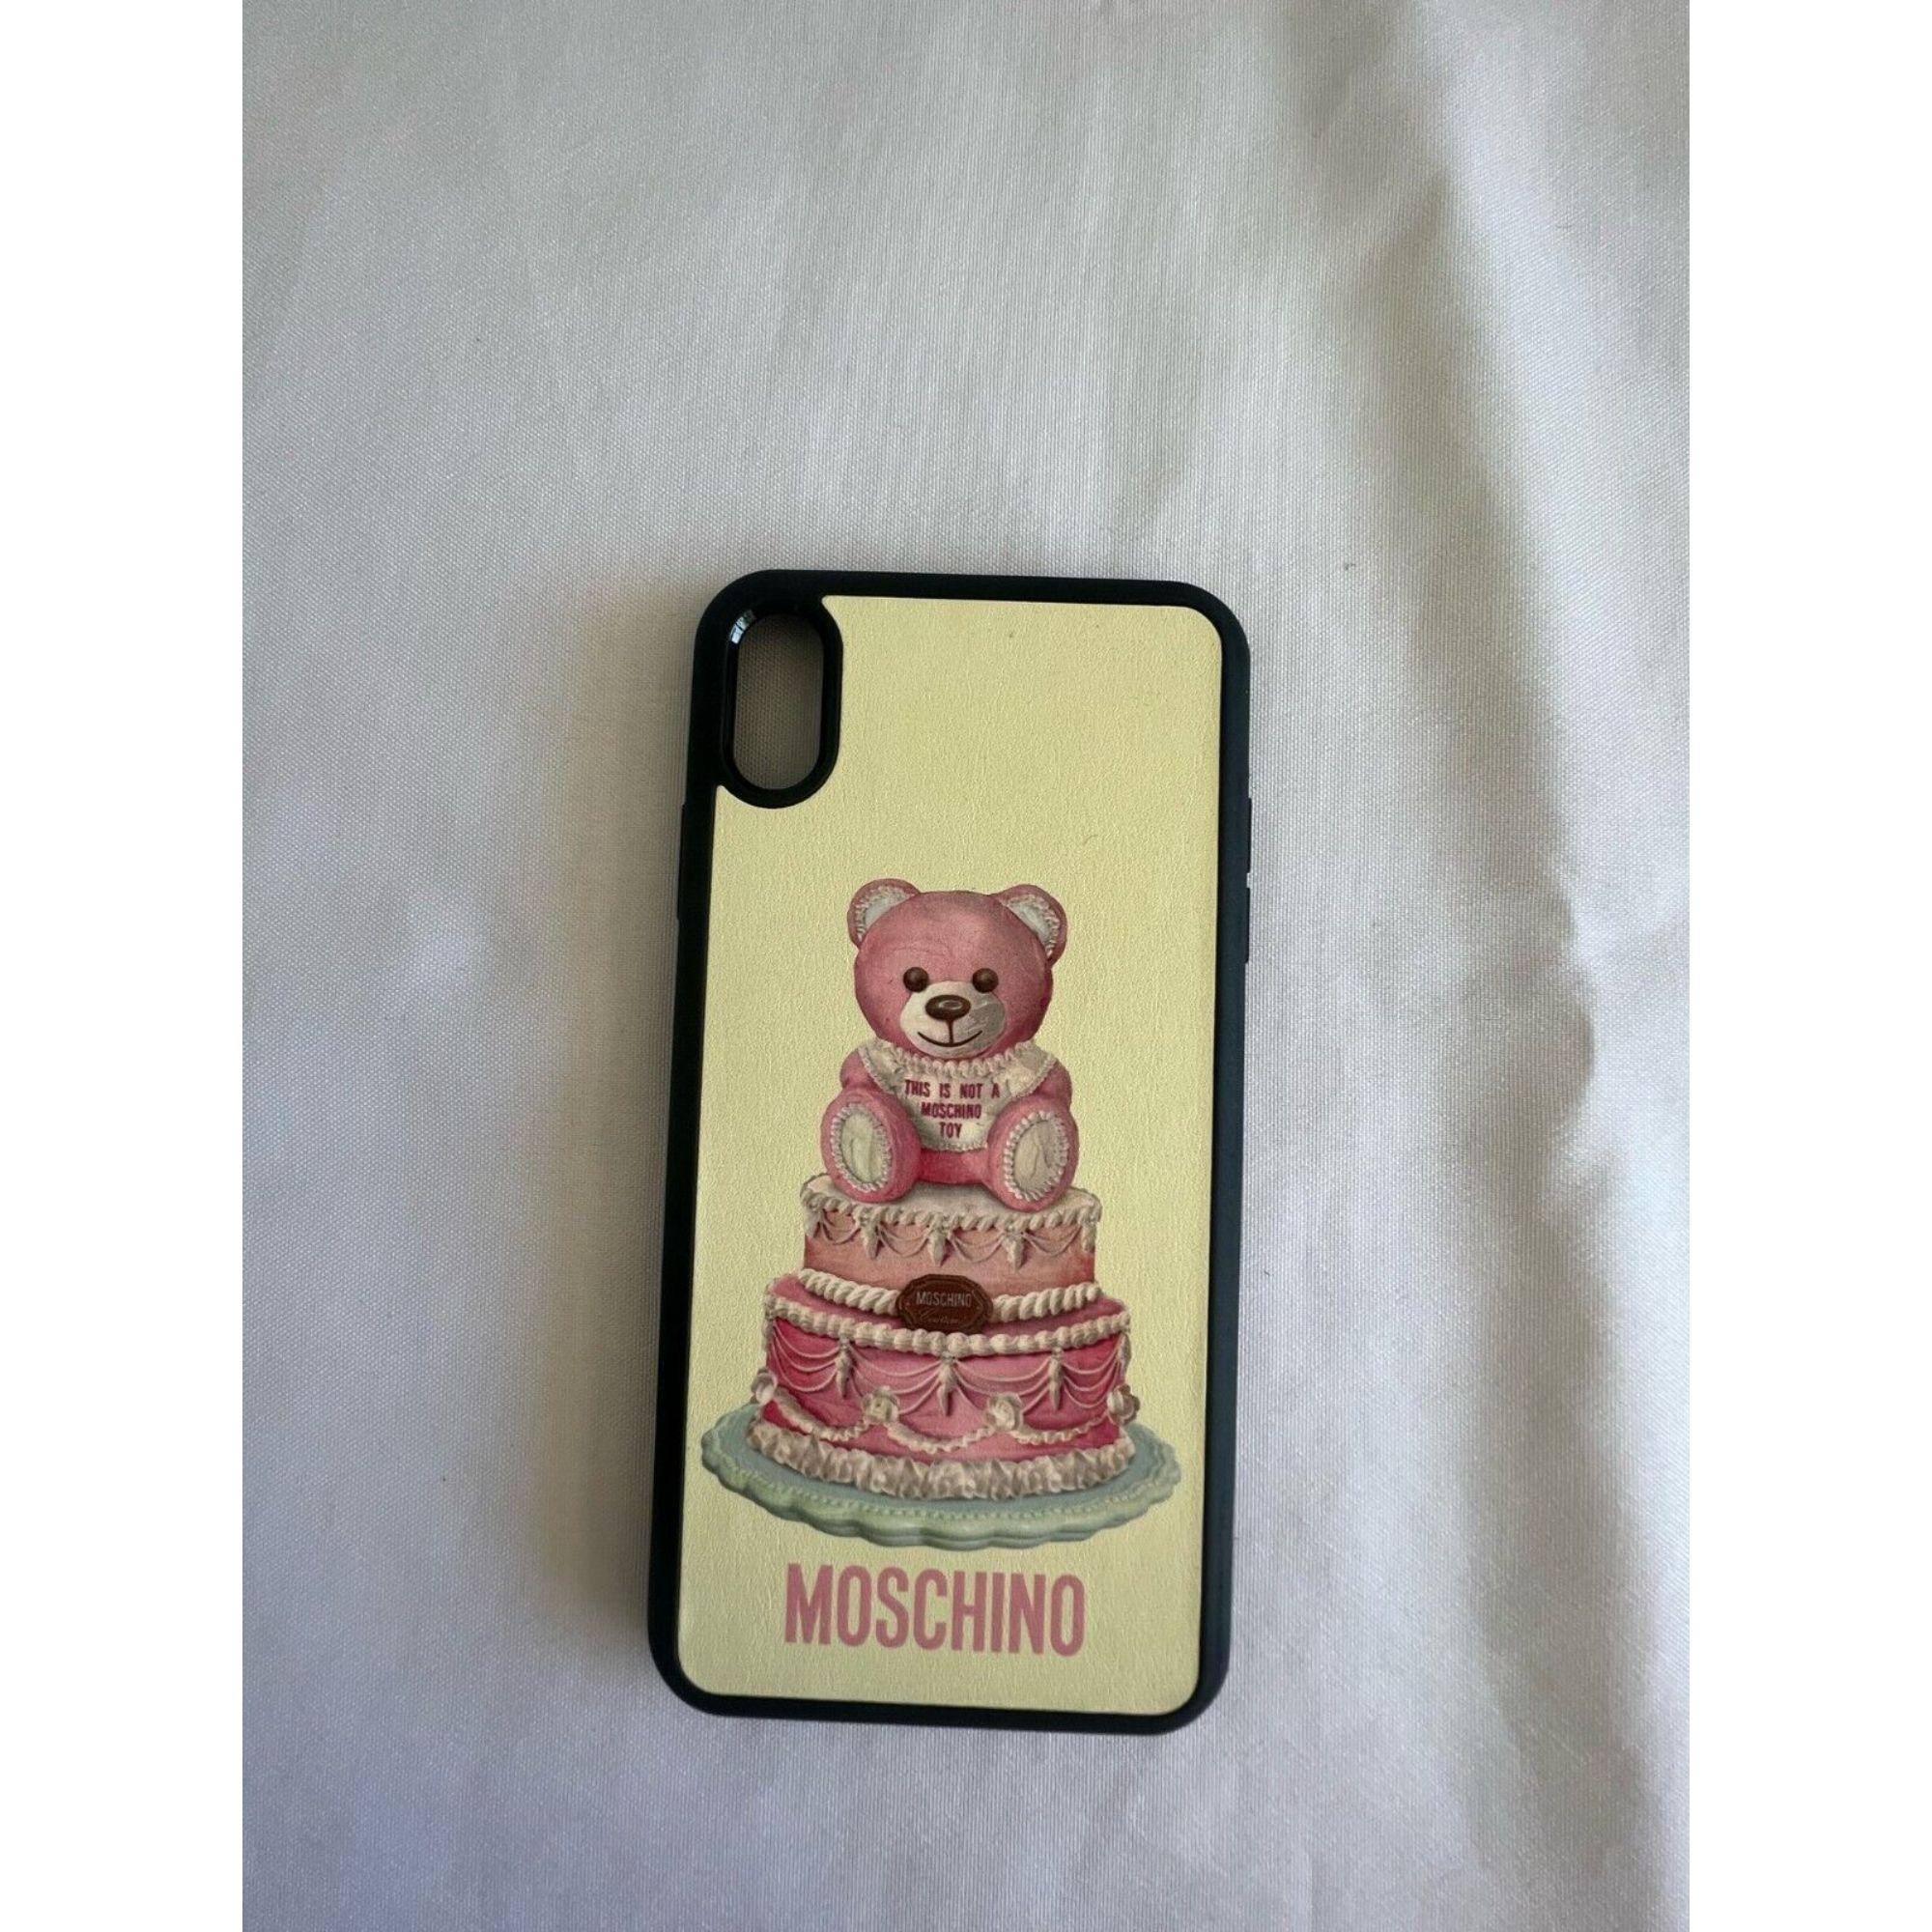 AW20 Moschino Couture Jeremy Scott Pink Teddy Bear on a cake iPhone XS Max case

Additional Information:
Material: 60% PU, 40% Policarbonato
Color: Off-white, Pink, Black
Size: One Size
Pattern: Solid, Logo details
Dimensions: Length 6.7